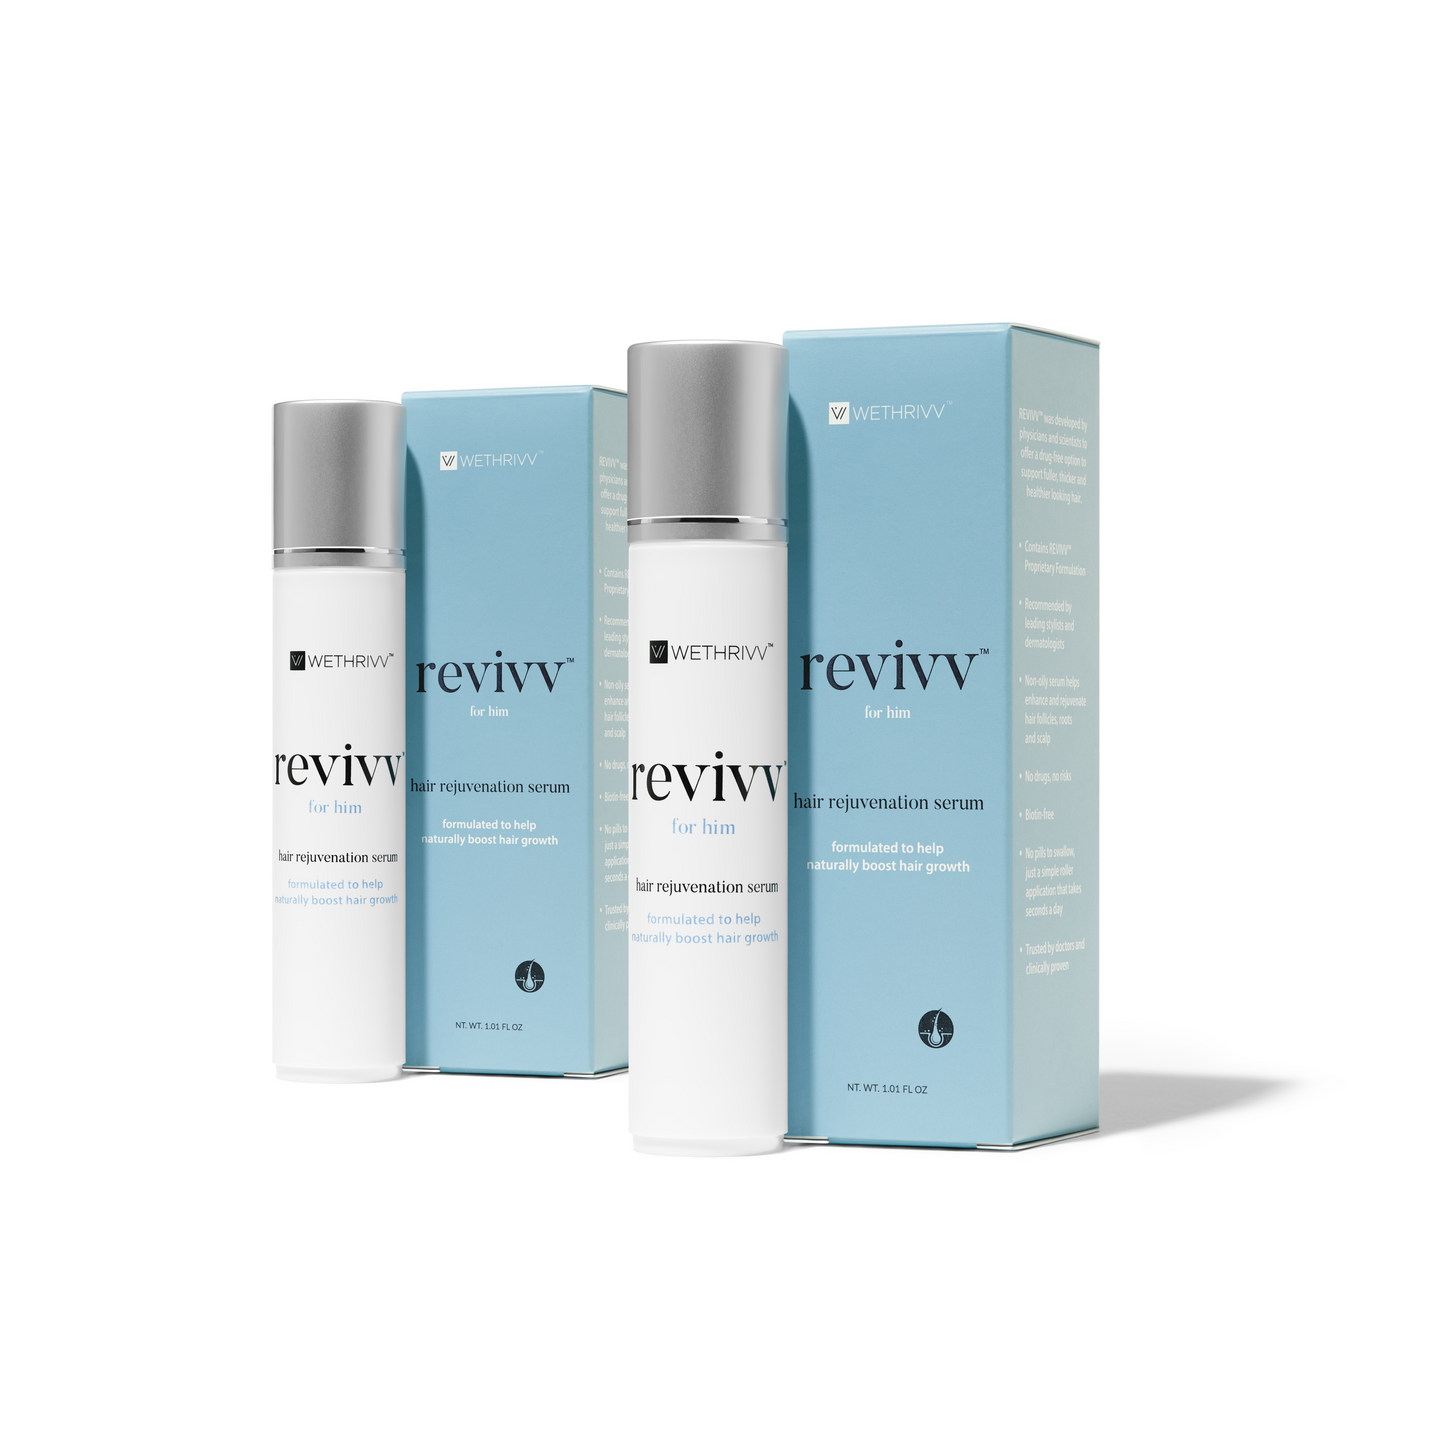 The Revivv Routine For Him - 3 Month Supply Subscribe & Save 20%